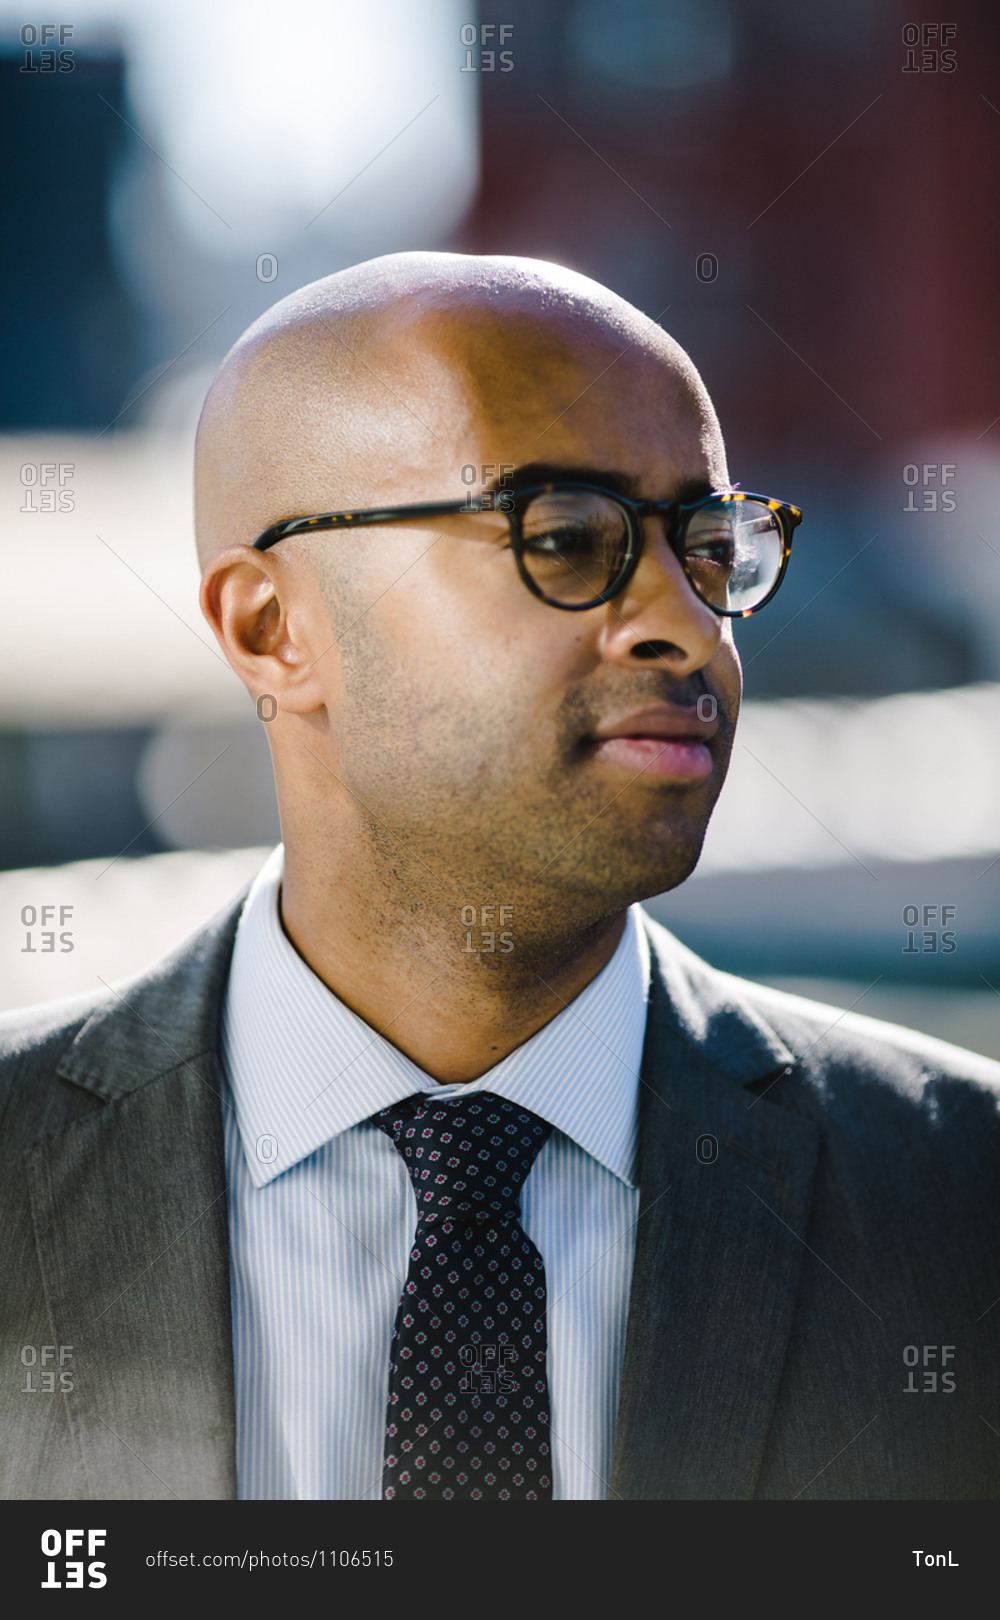 Portrait of a bald black man in a suit and glasses looking off into the distance